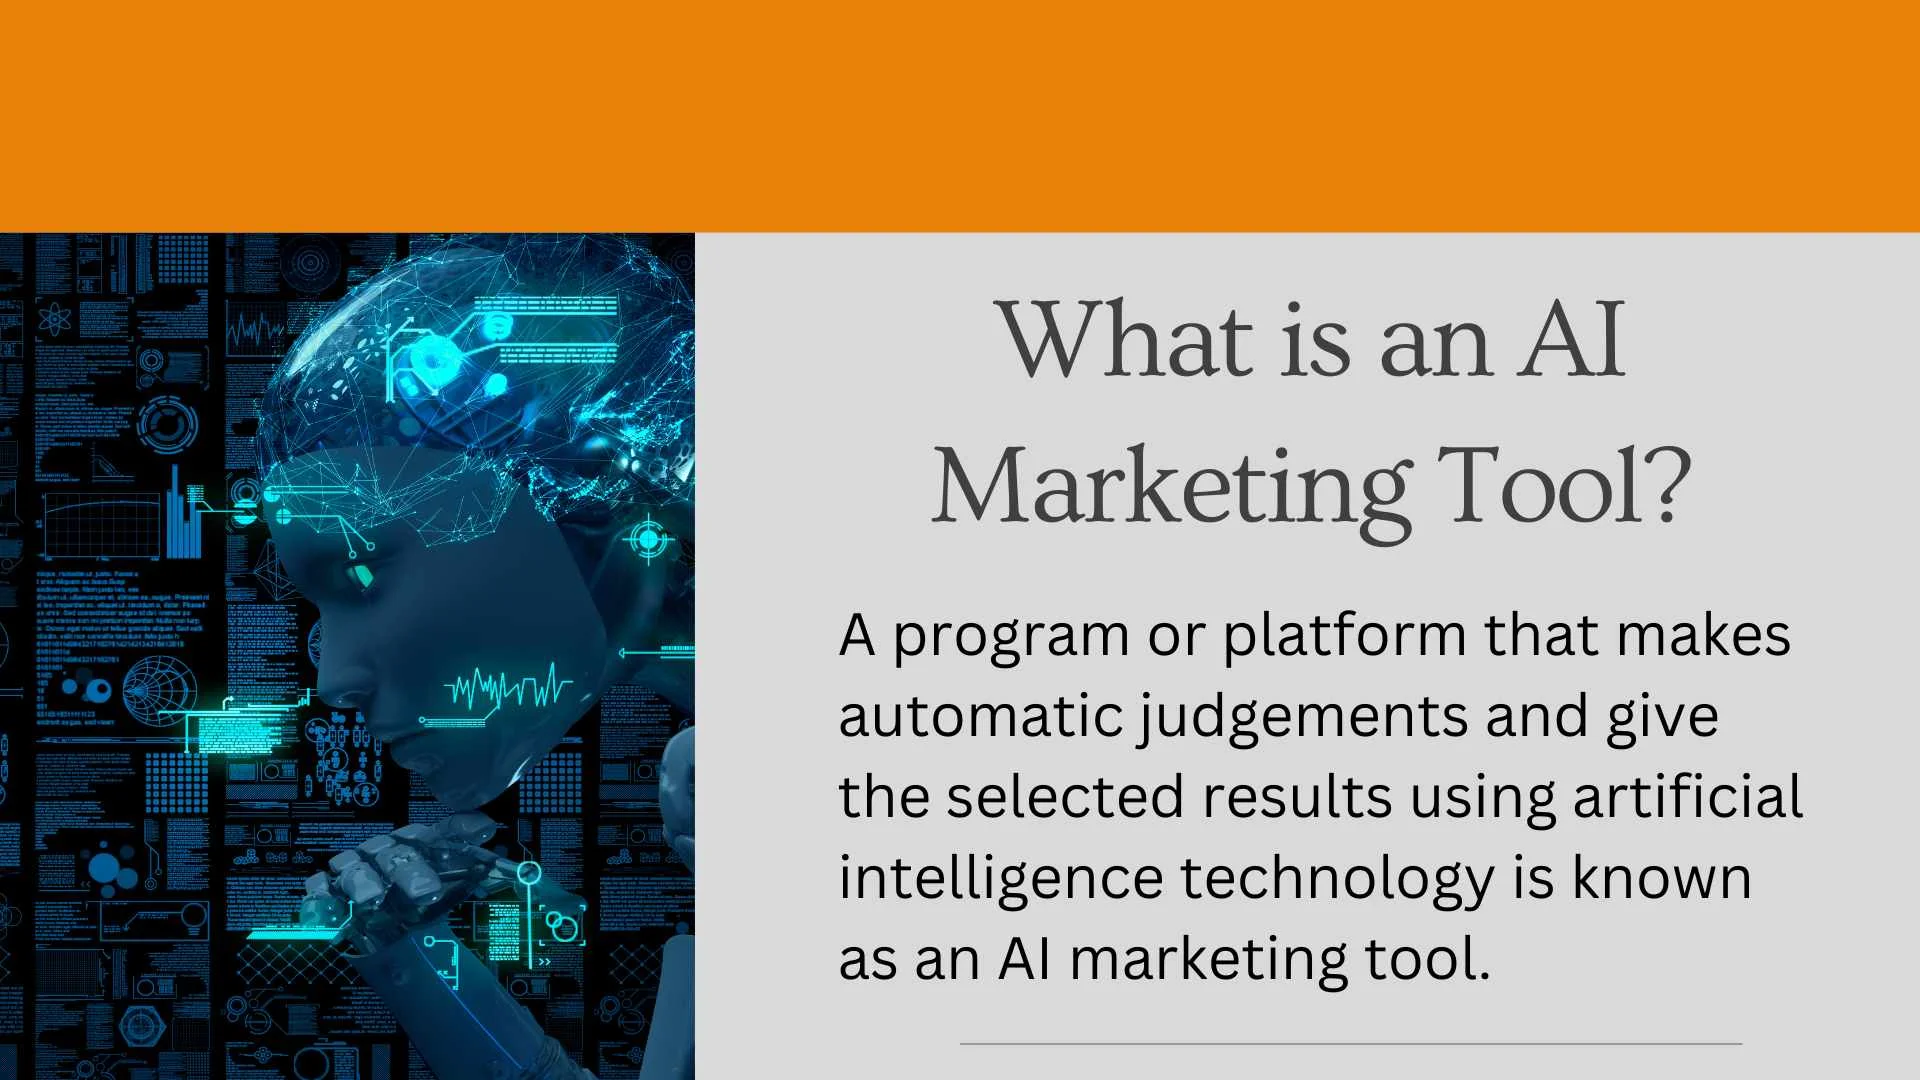 What is an AI Marketing Tool